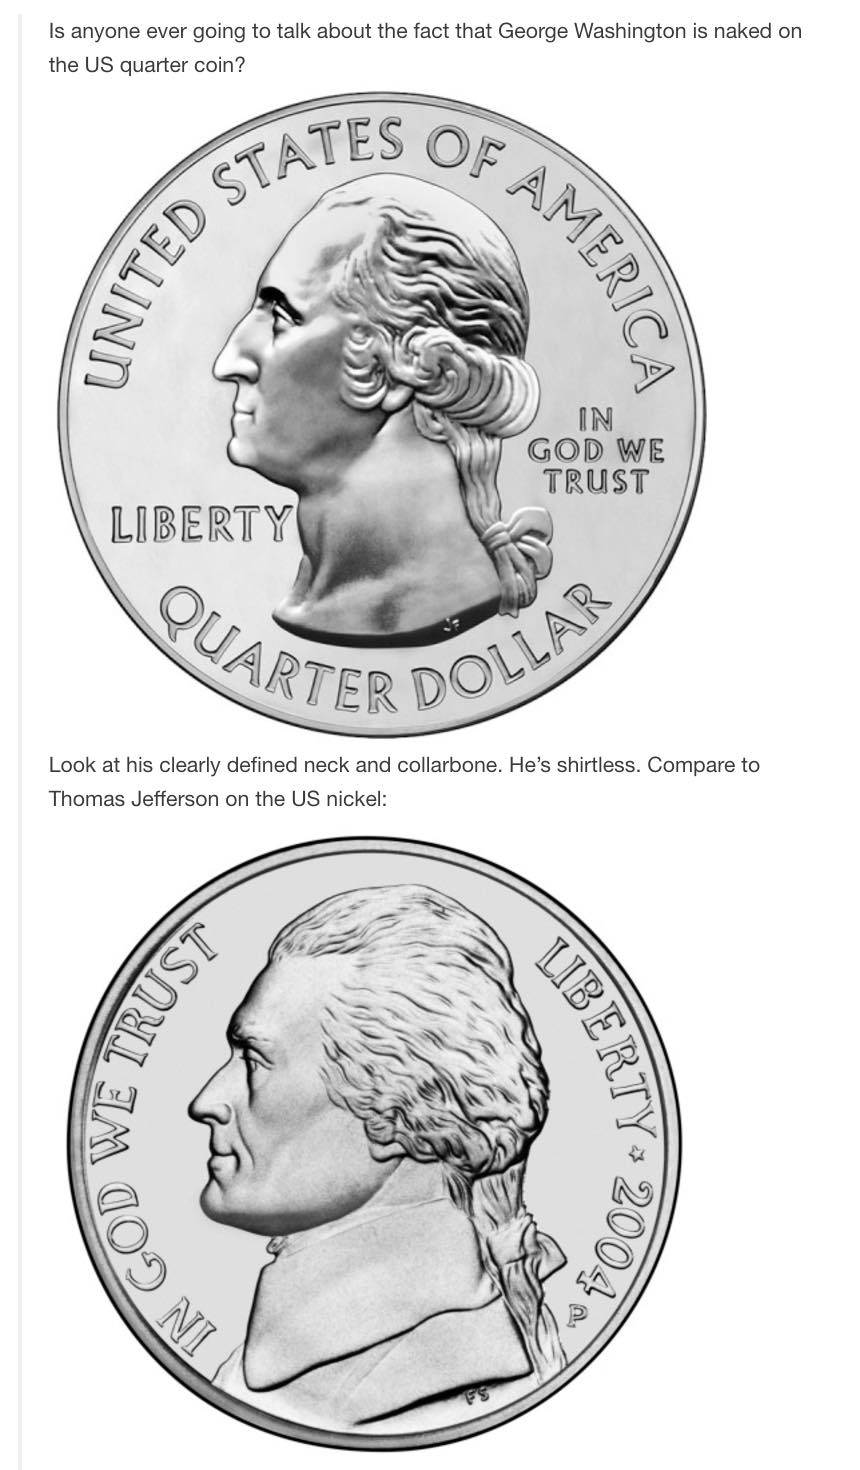 much is coins worth - Is anyone ever going to talk about the fact that George Washington is naked on the Us quarter coin? Gates Of Nited Stat Meric In God We Trust Liberty Ter Dolla Look at his clearly defined neck and collarbone. He's shirtless. Compare 